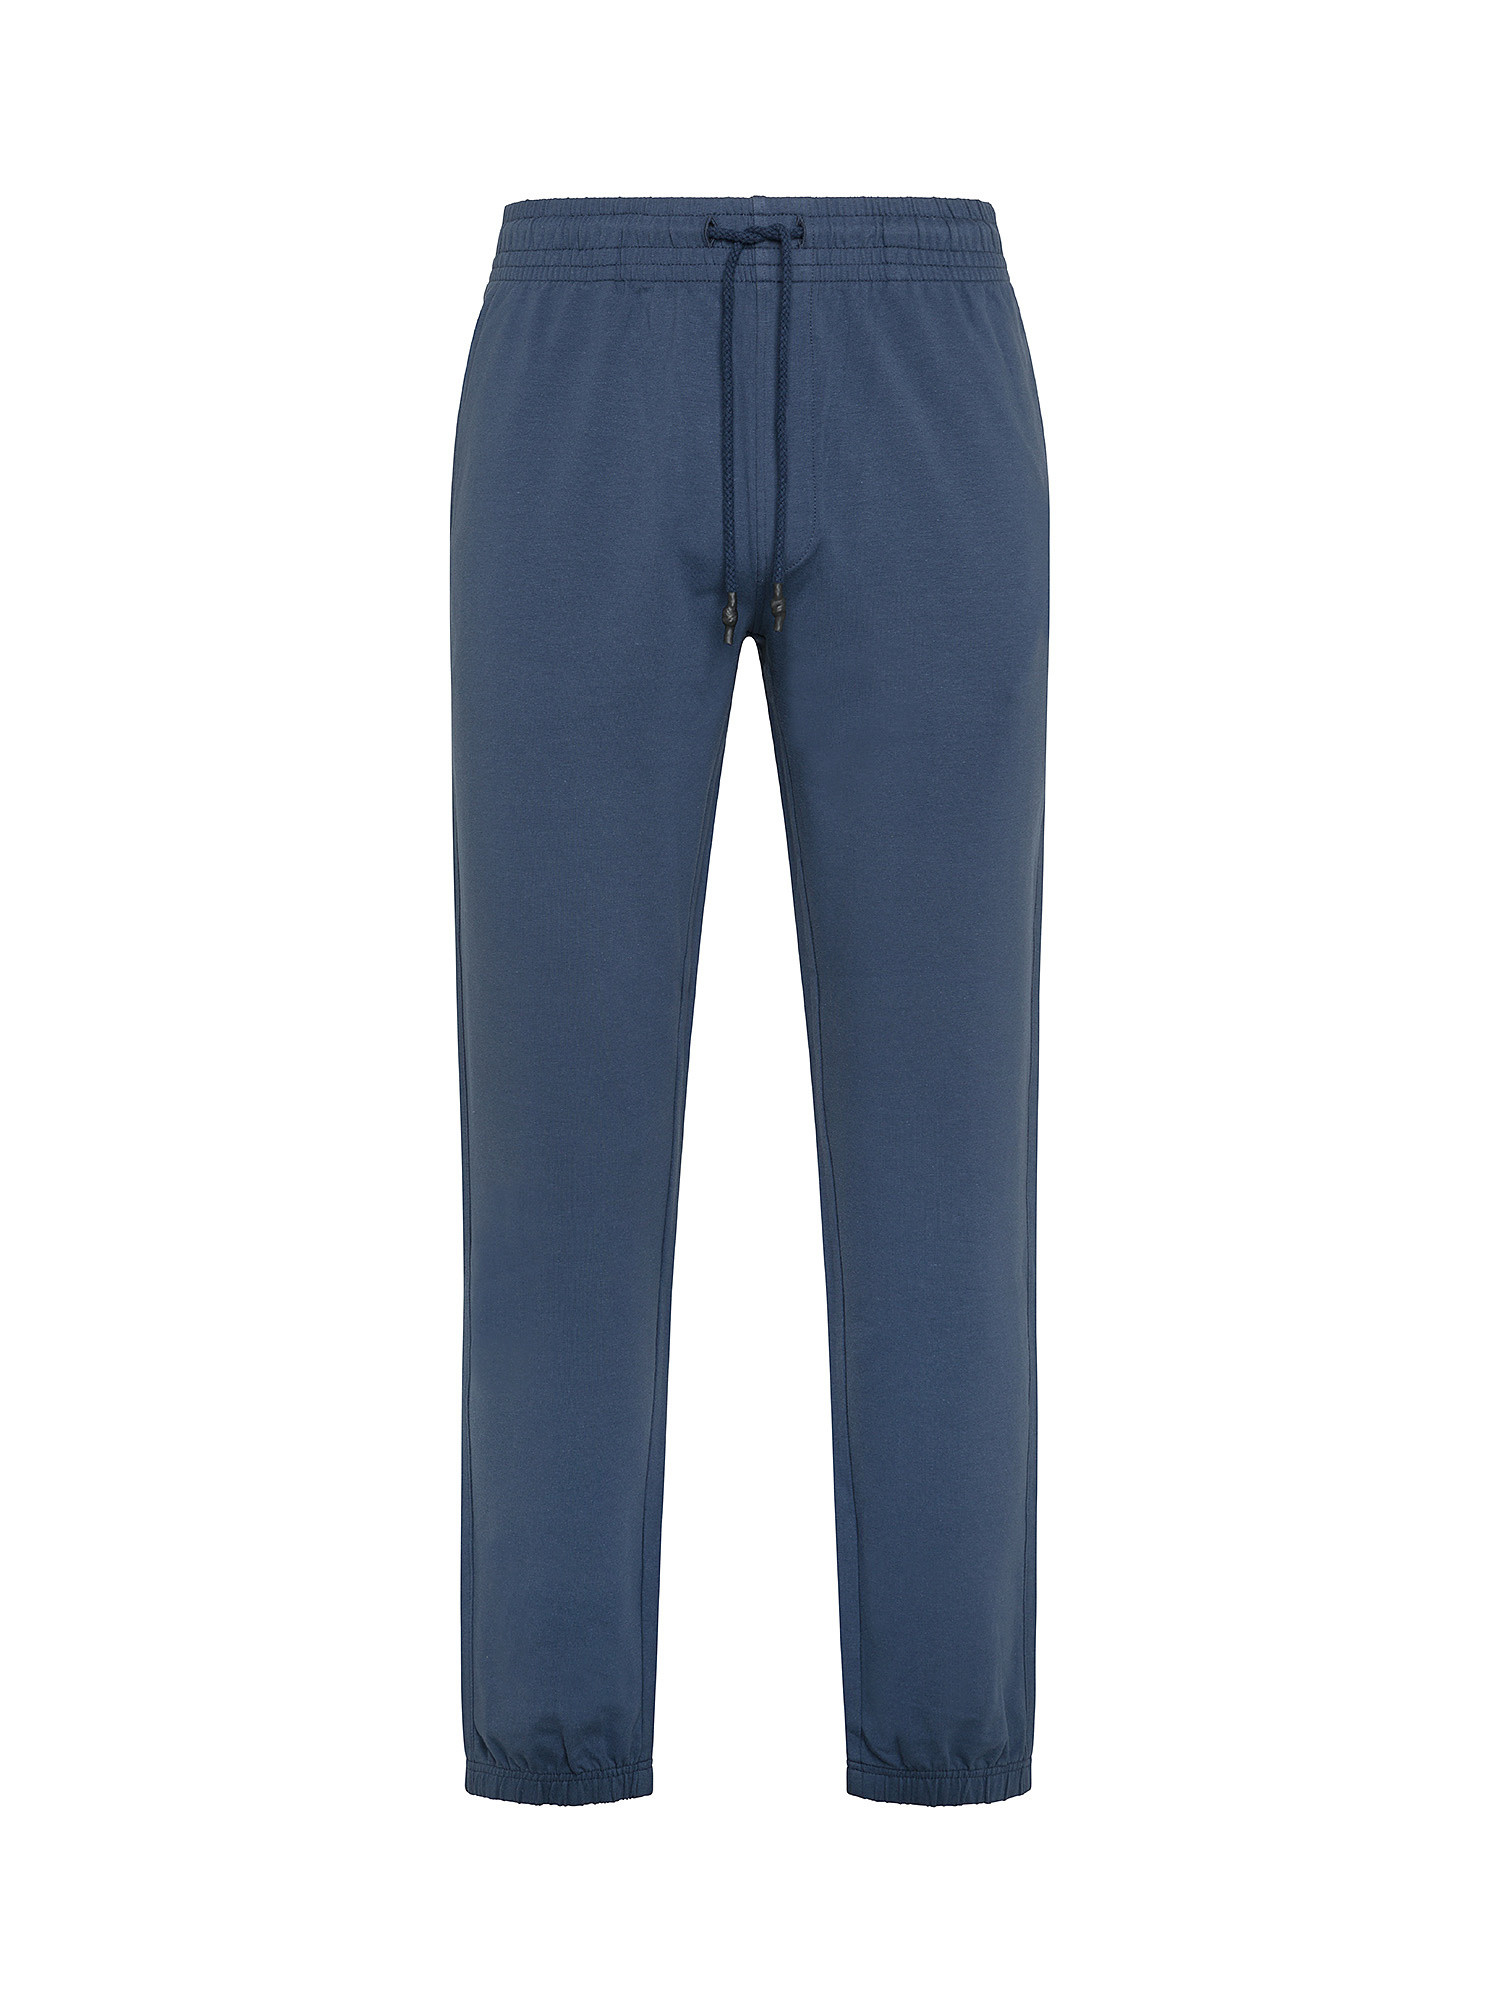 JCT - Stretch cotton trousers, Blue, large image number 0